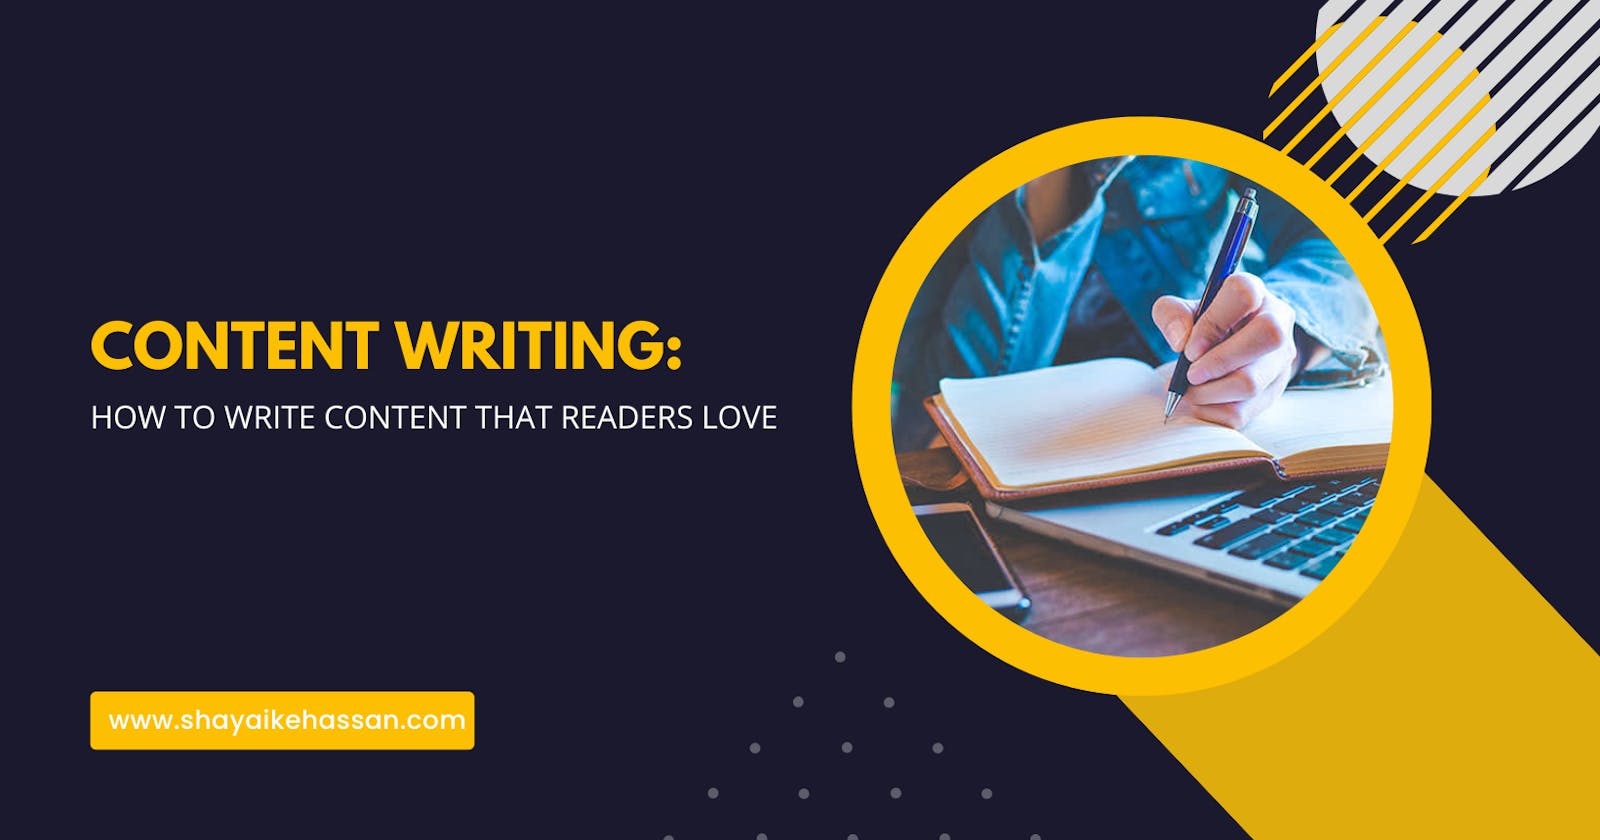 Content Writing: How to Write Content That Readers Love